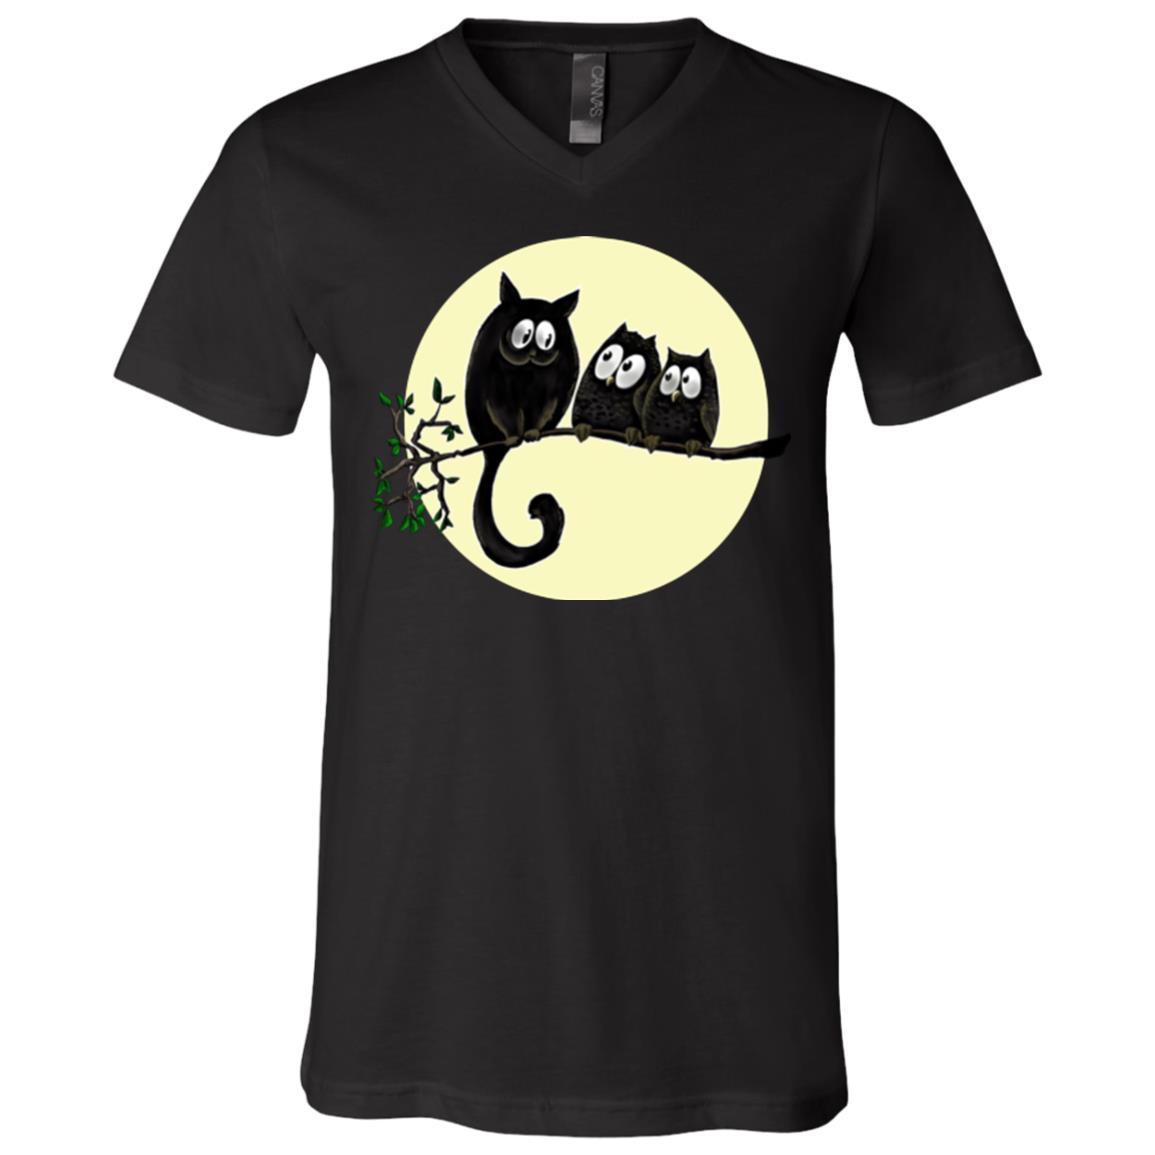 Cat Shirt Cat and Owls Cute Funny Unisex Tees - GoneBold.gift